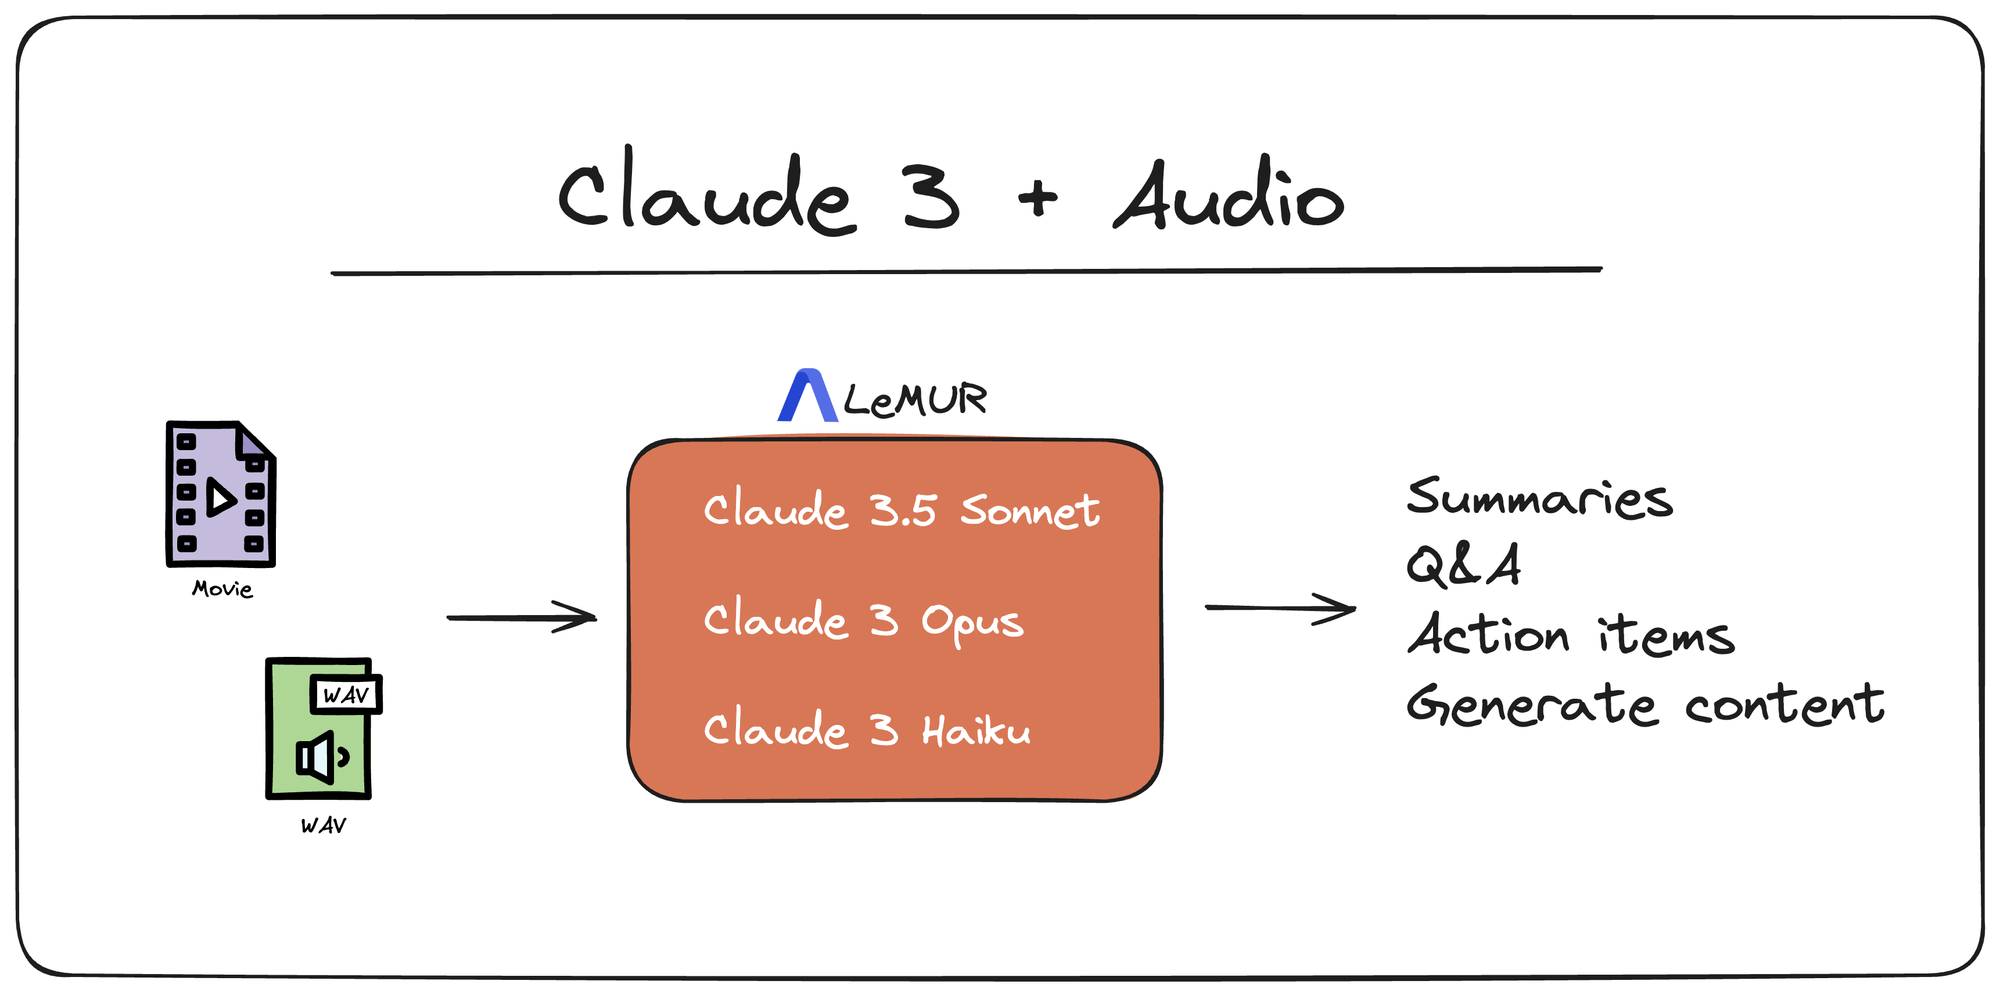 Get started using Claude 3.5 Sonnet with audio data